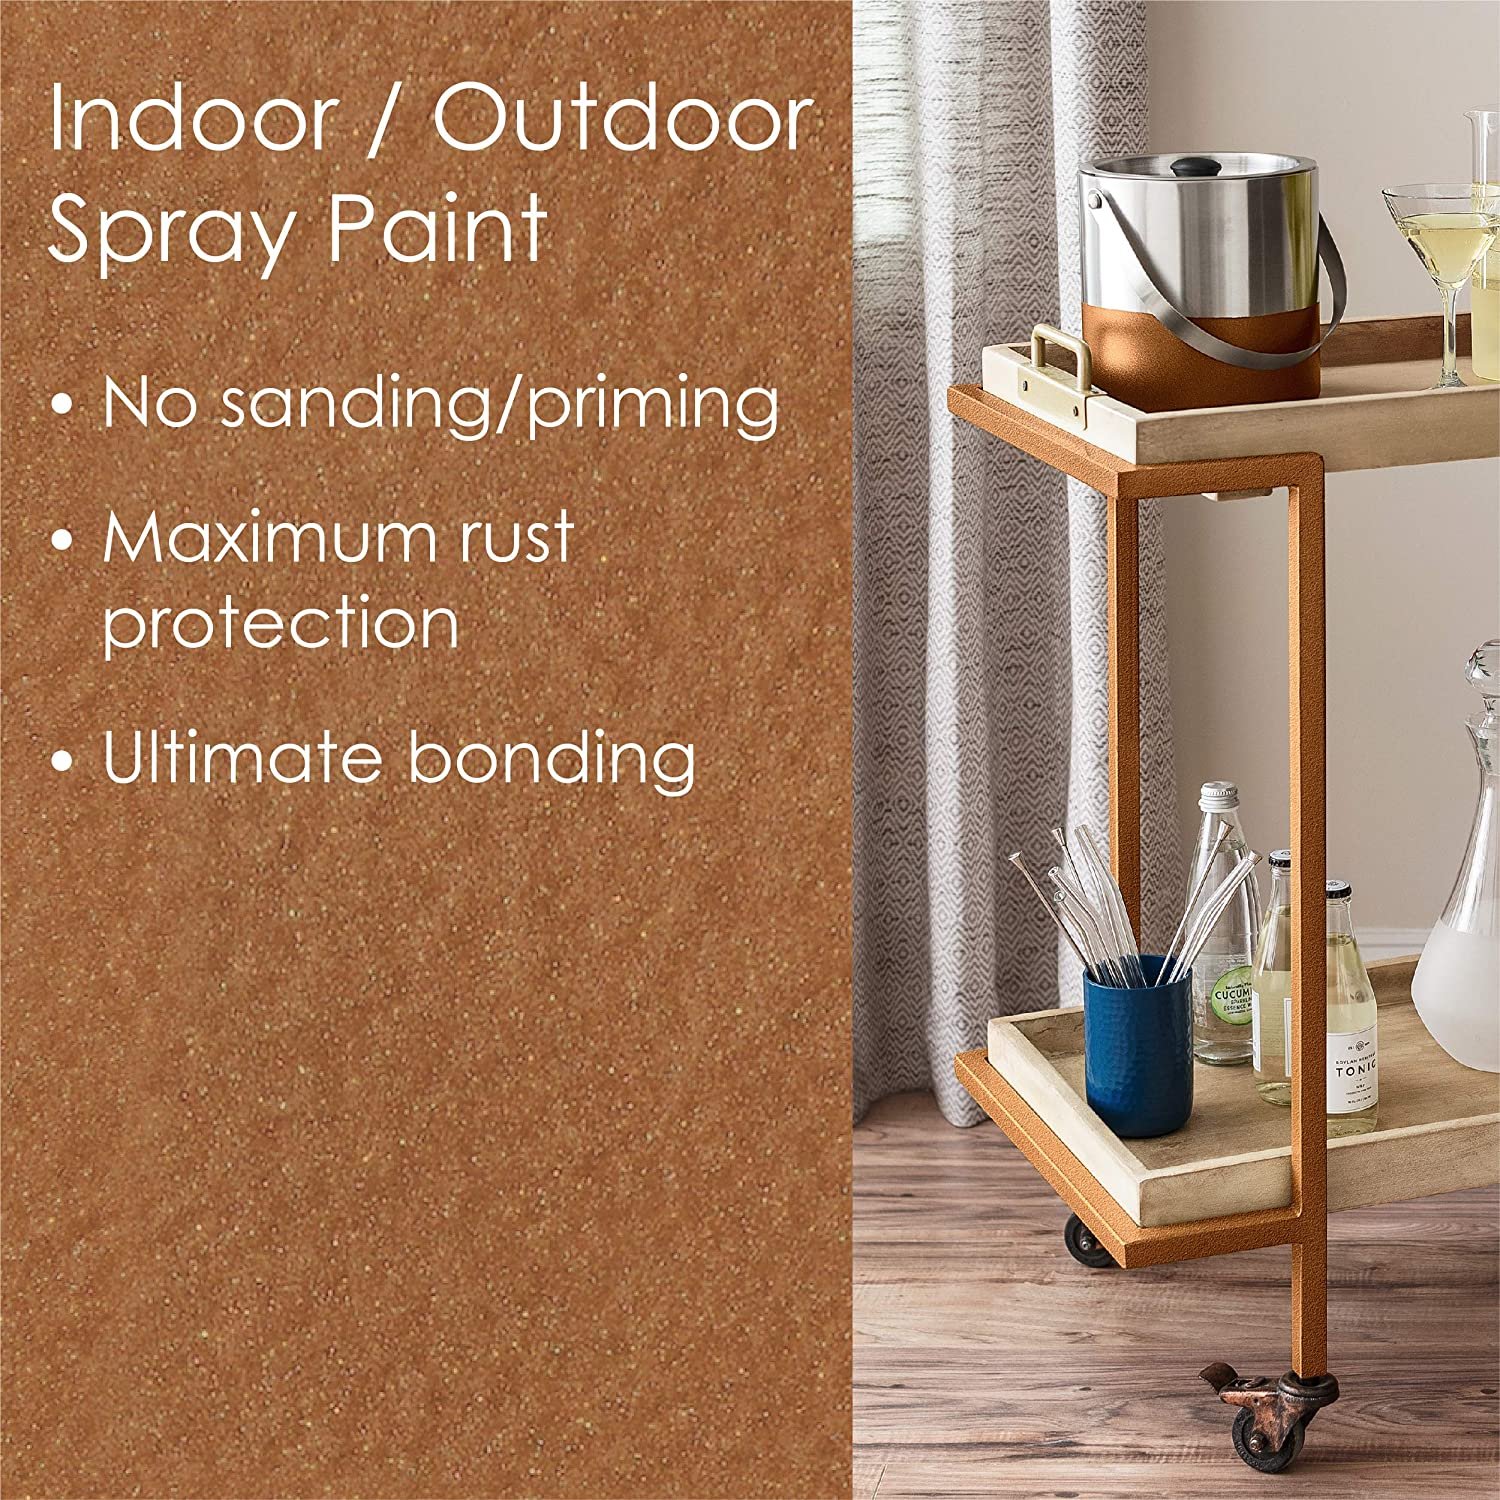 Krylon K02786007 Fusion All-In-One Spray Paint for Indoor/Outdoor Use,  Hammered Copper, 12 Oz. 